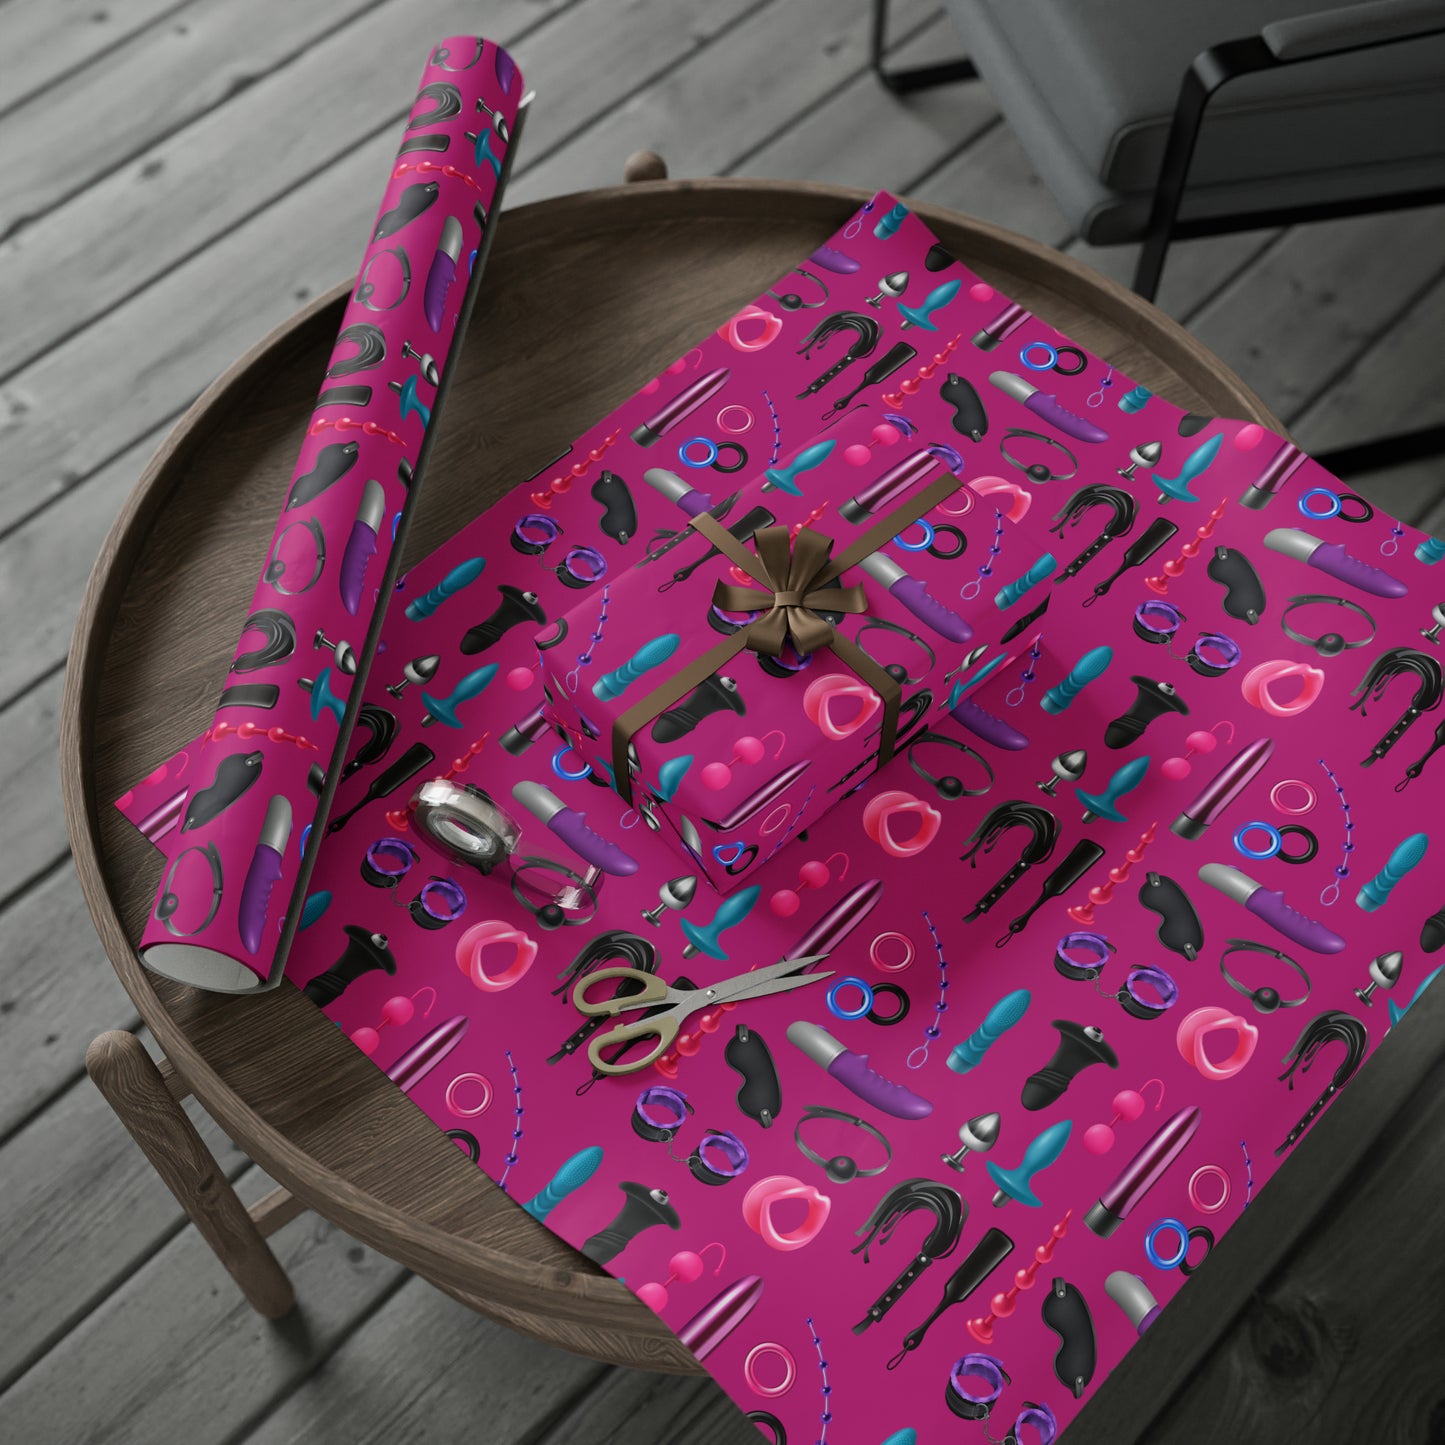 Bachelorette Sex toy Variety High Definition Happy Birthday Gag Gift Present Wrapping Paper